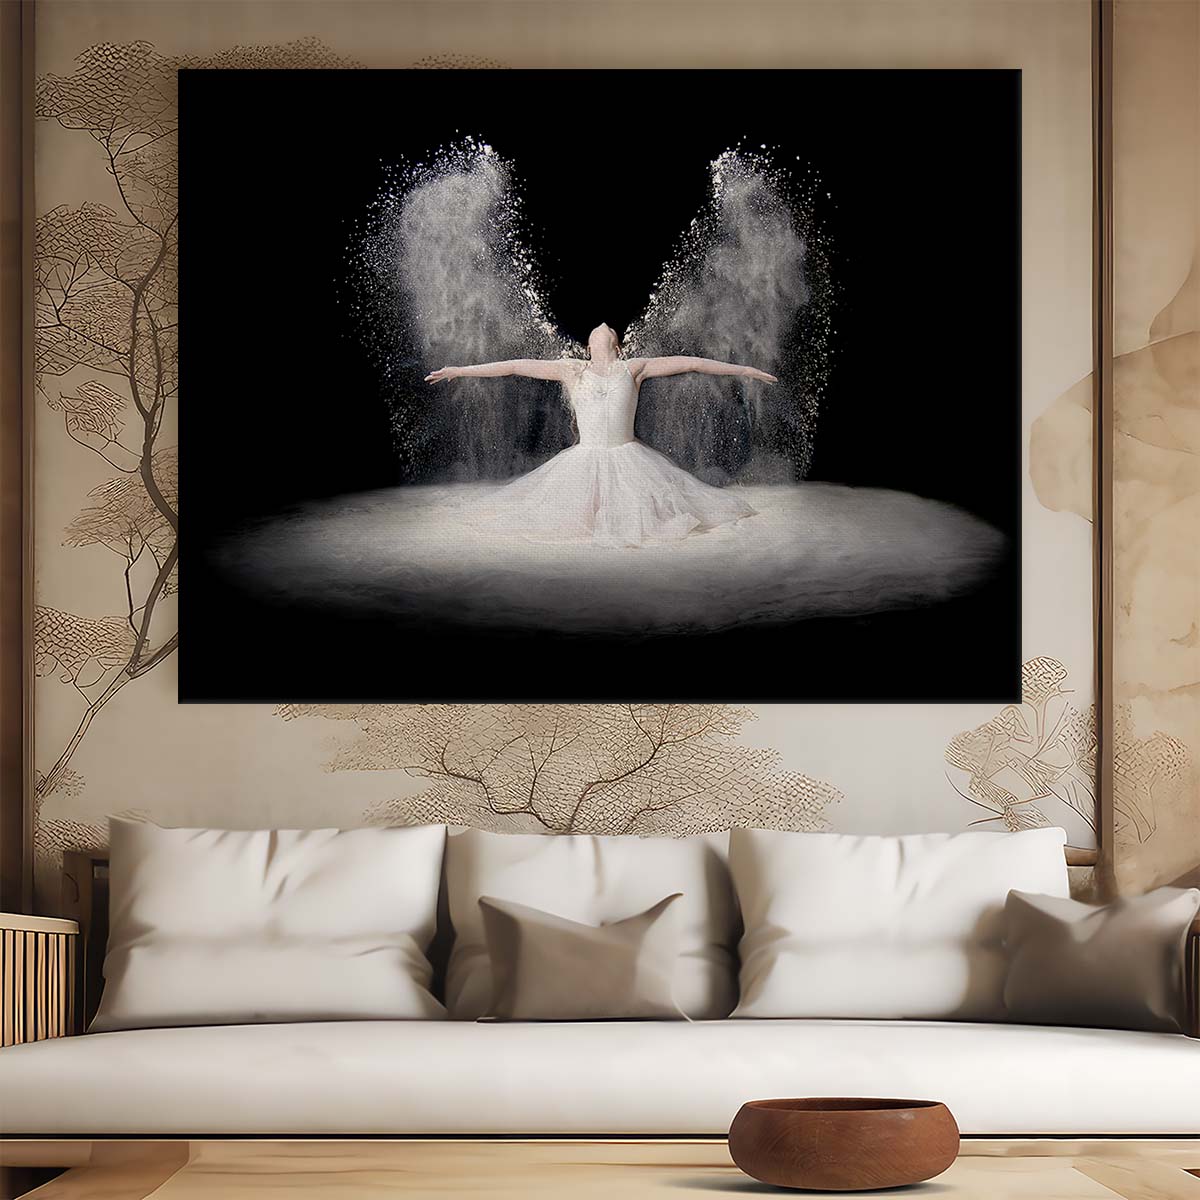 Spiritual Ballet Dancer Angel Wings Wall Art by Luxuriance Designs. Made in USA.